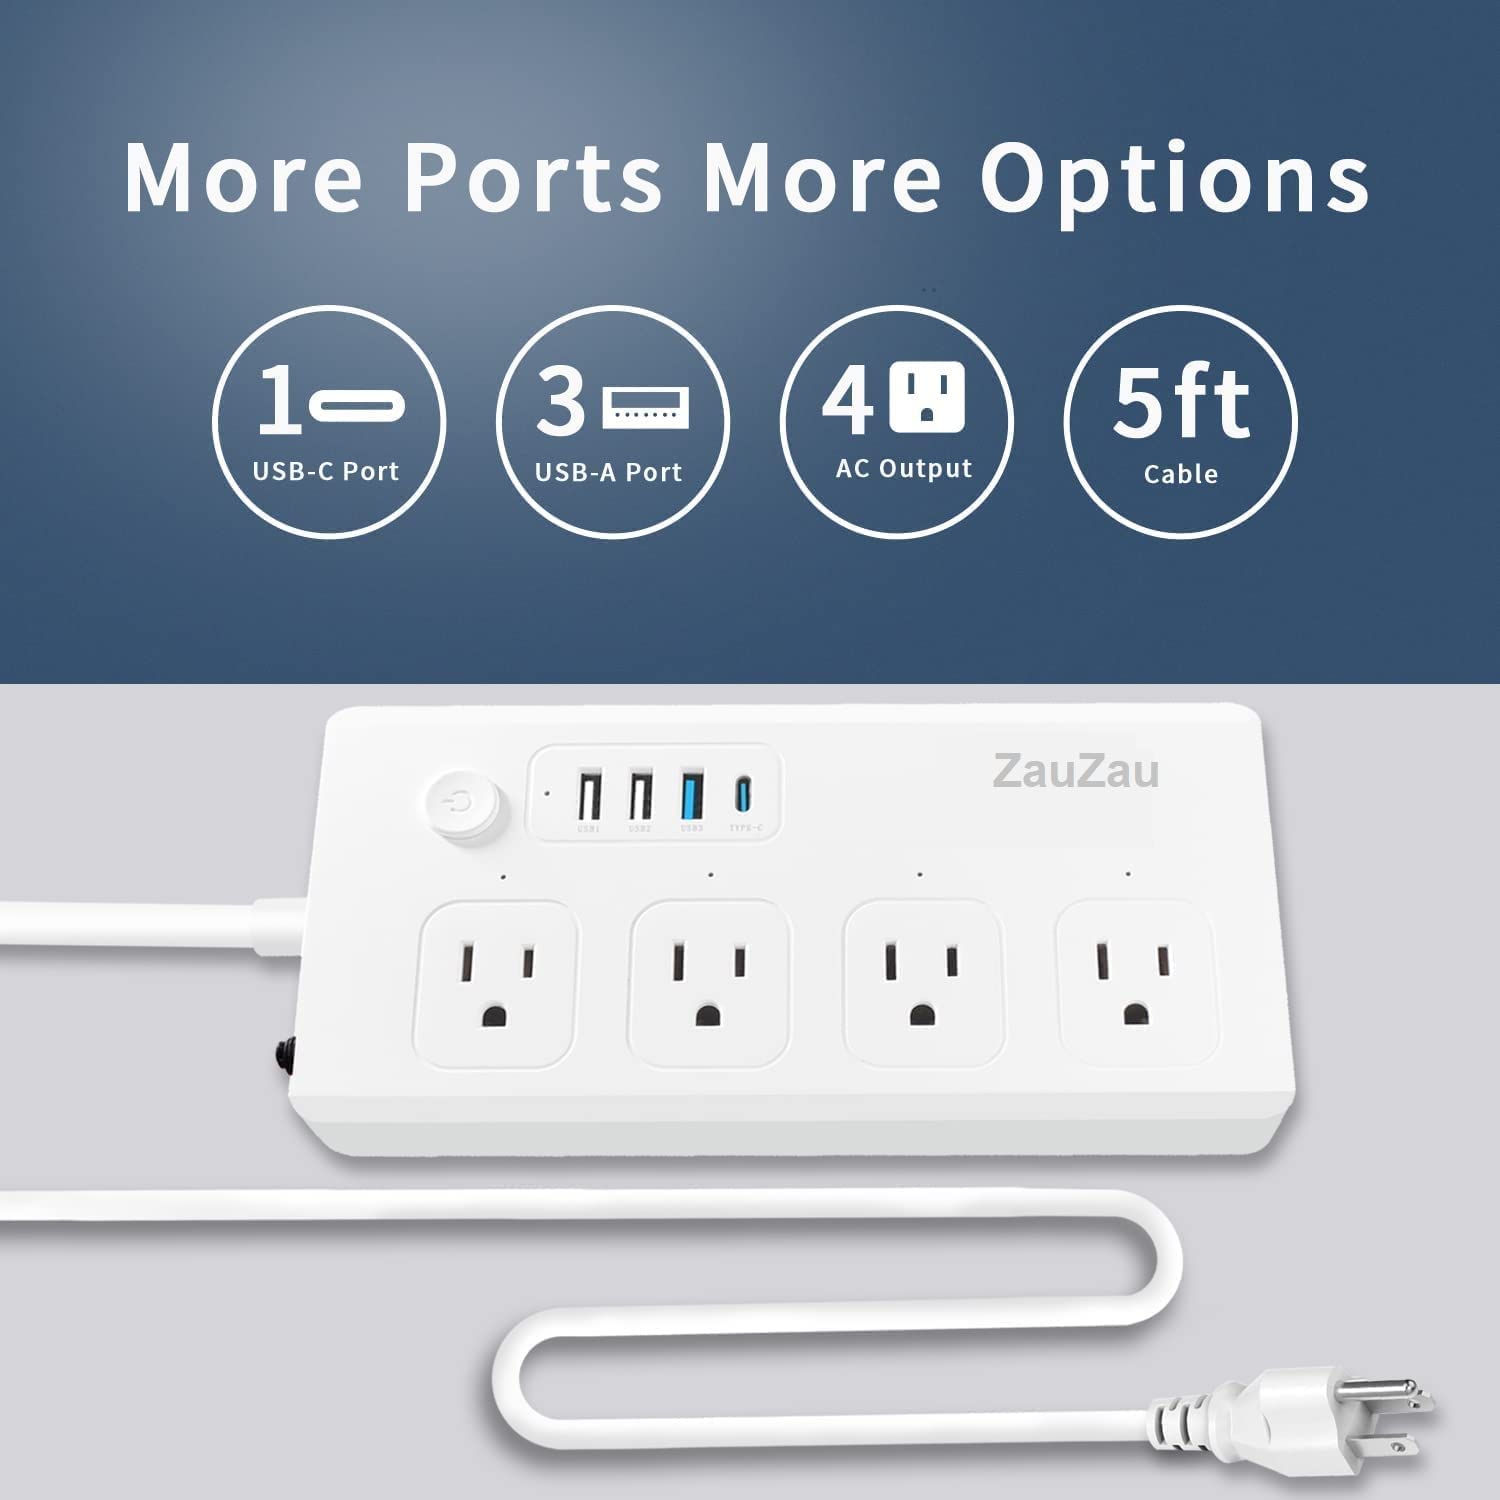 Zauzau Smart PD Power Strip and Surge Protectors Type-C 30W USB-C 18W 4 AC outlets 10A 1650W 5 feet Extension Cord Flat Plug for Home Office Hotel